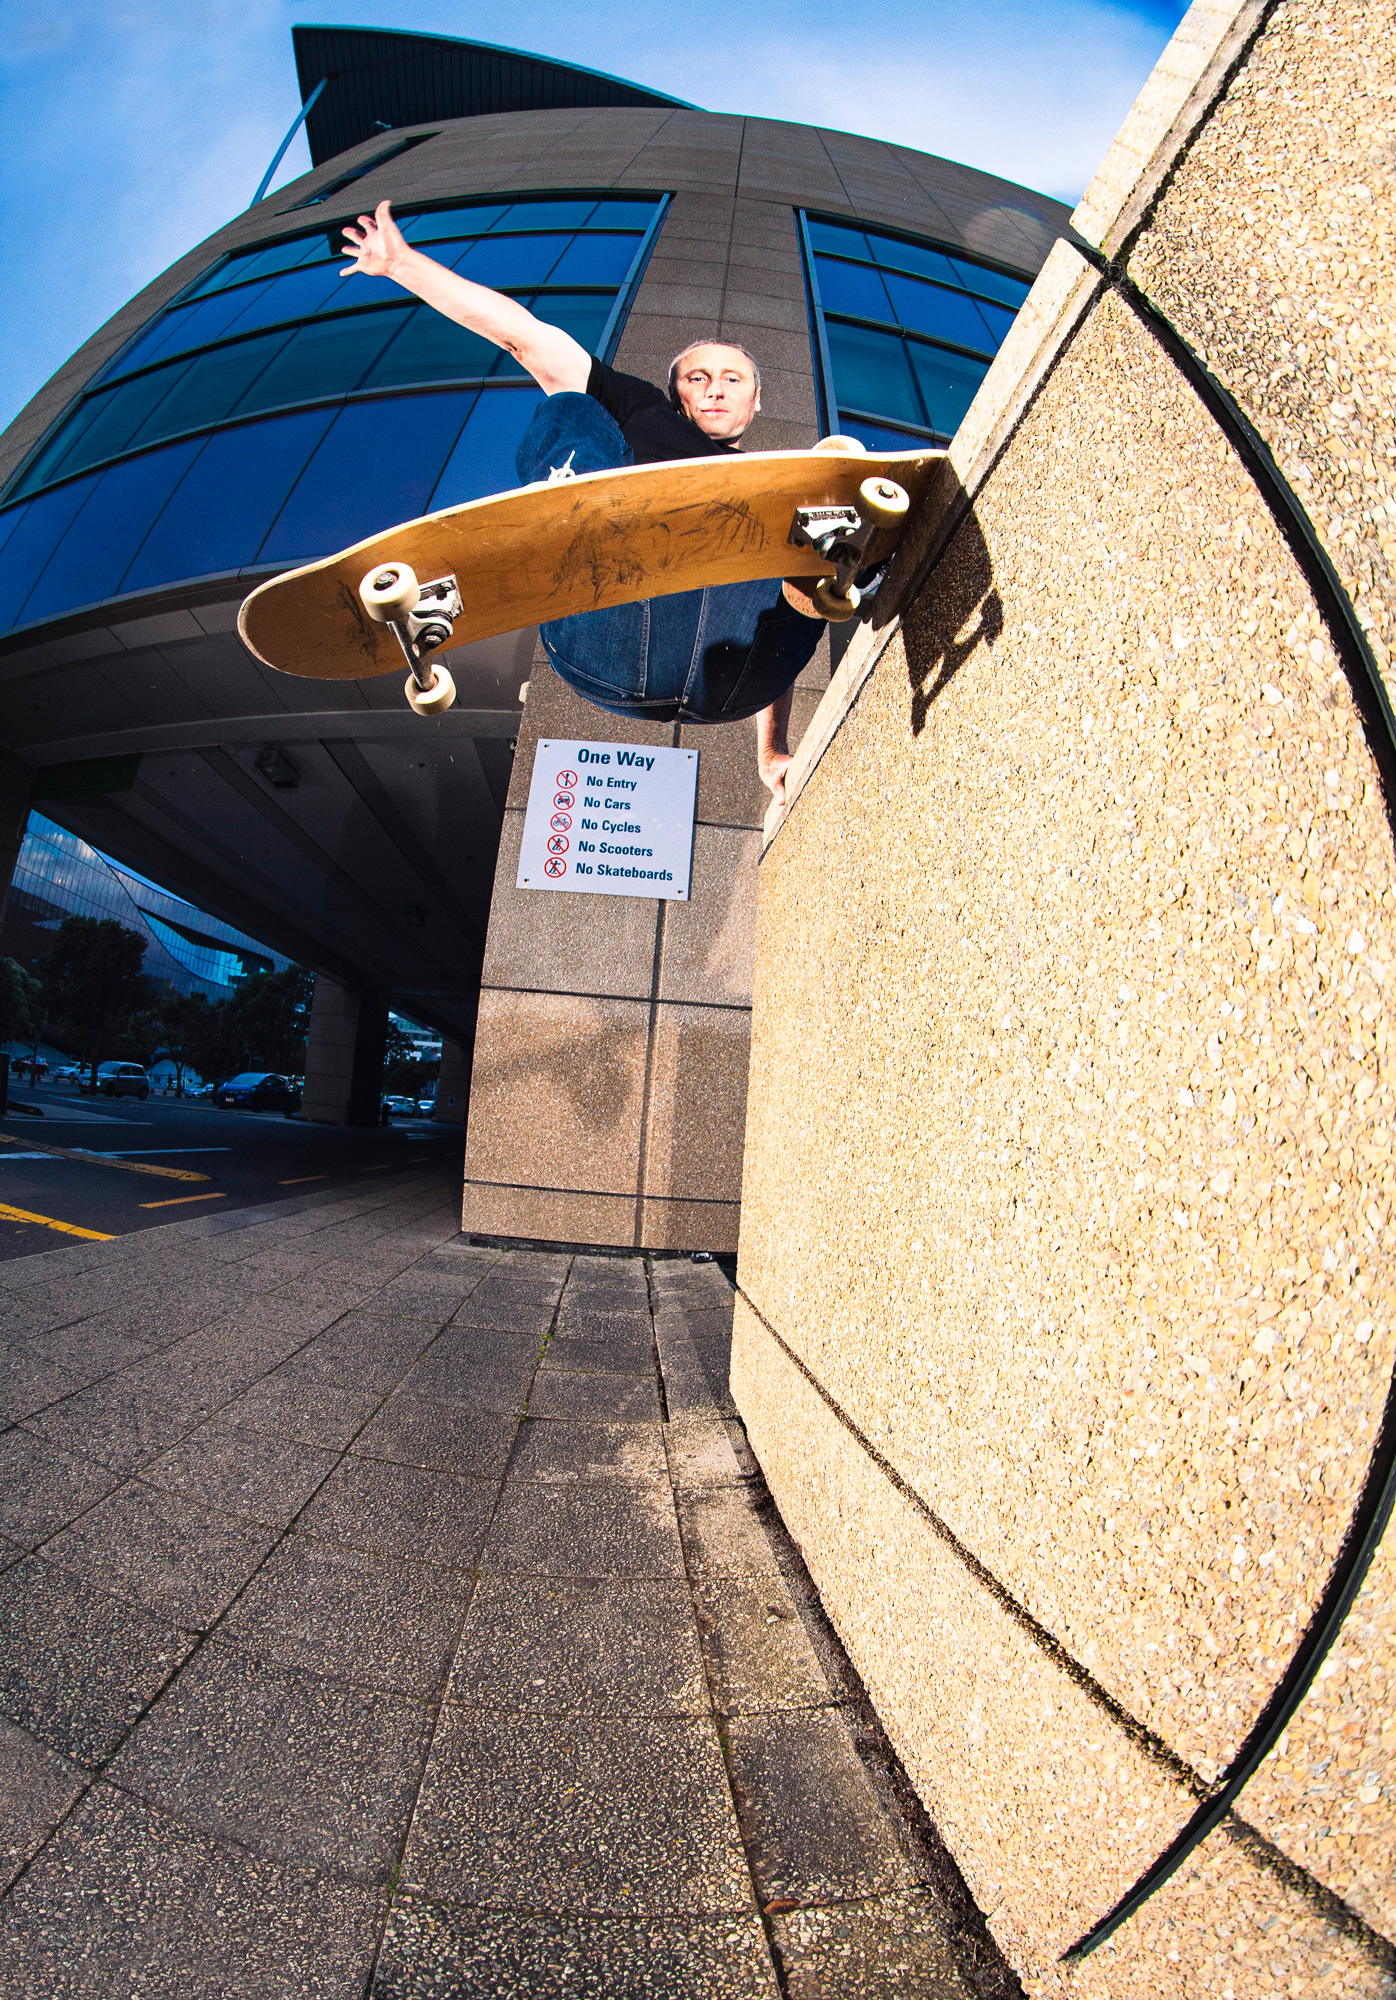 Layback wollie noseslide. Not a spot (Te Papa). Photo by David Read 